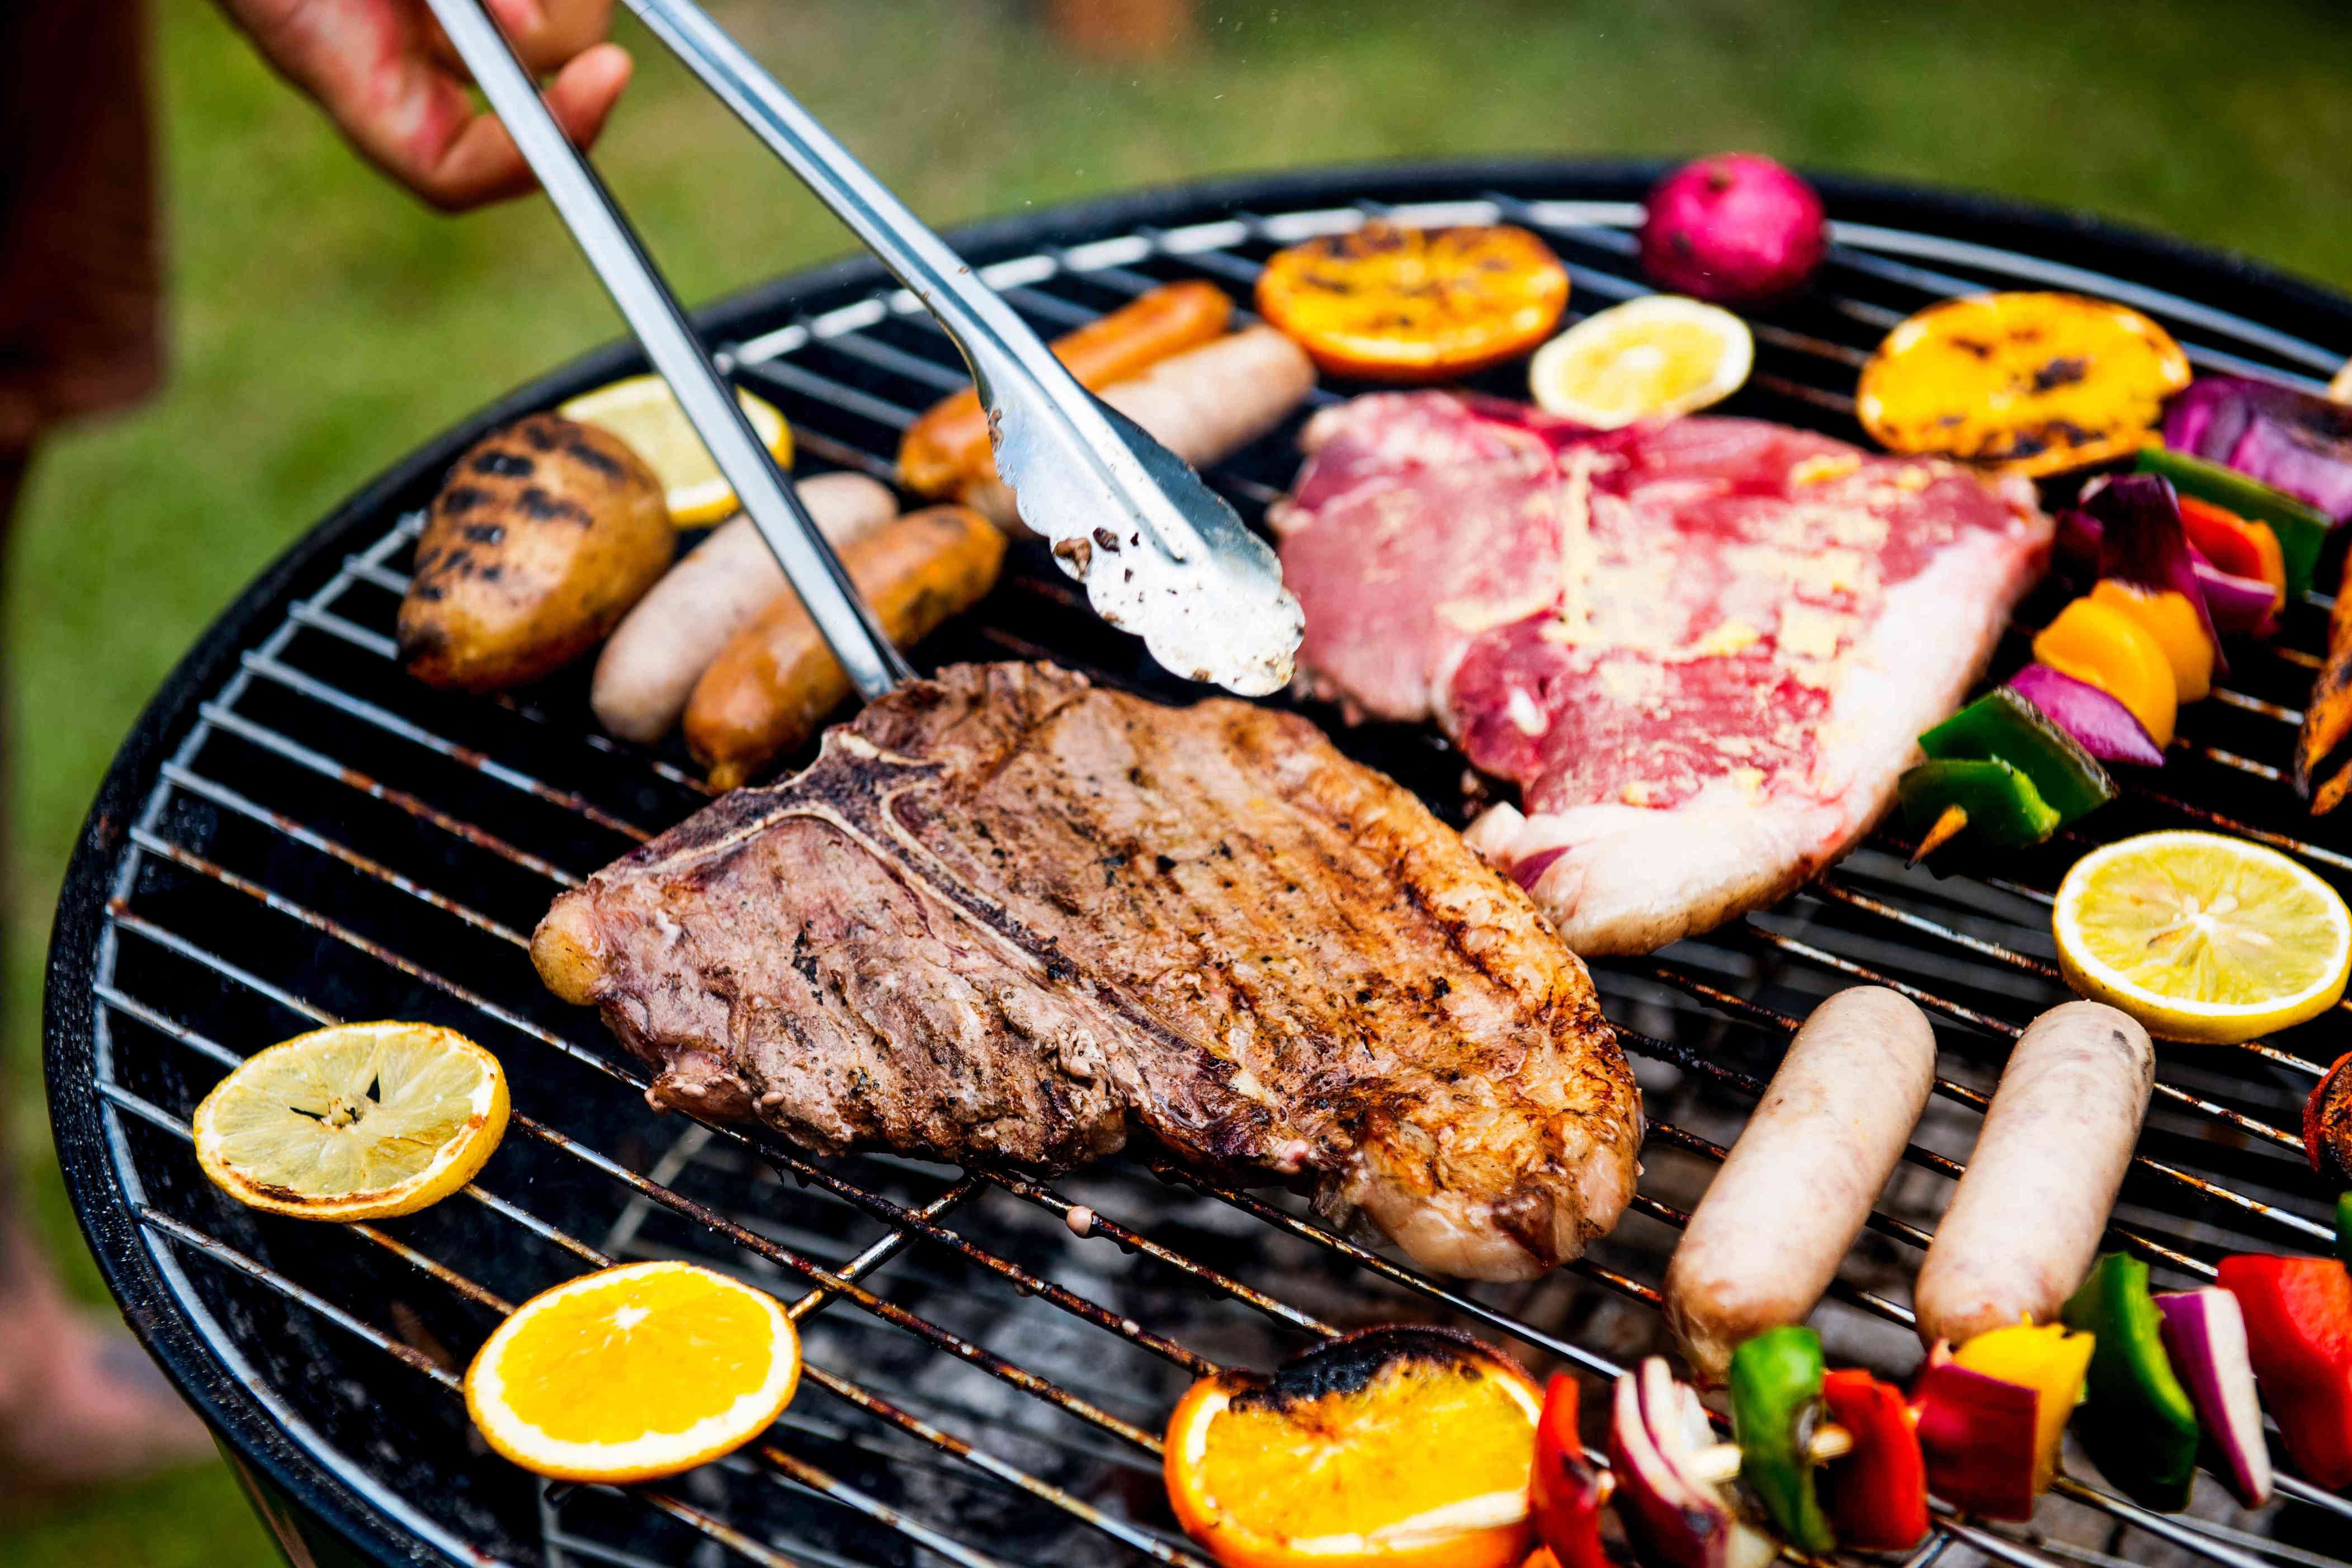 6 Common Grilling Mistakes To Avoid According To Pitmasters